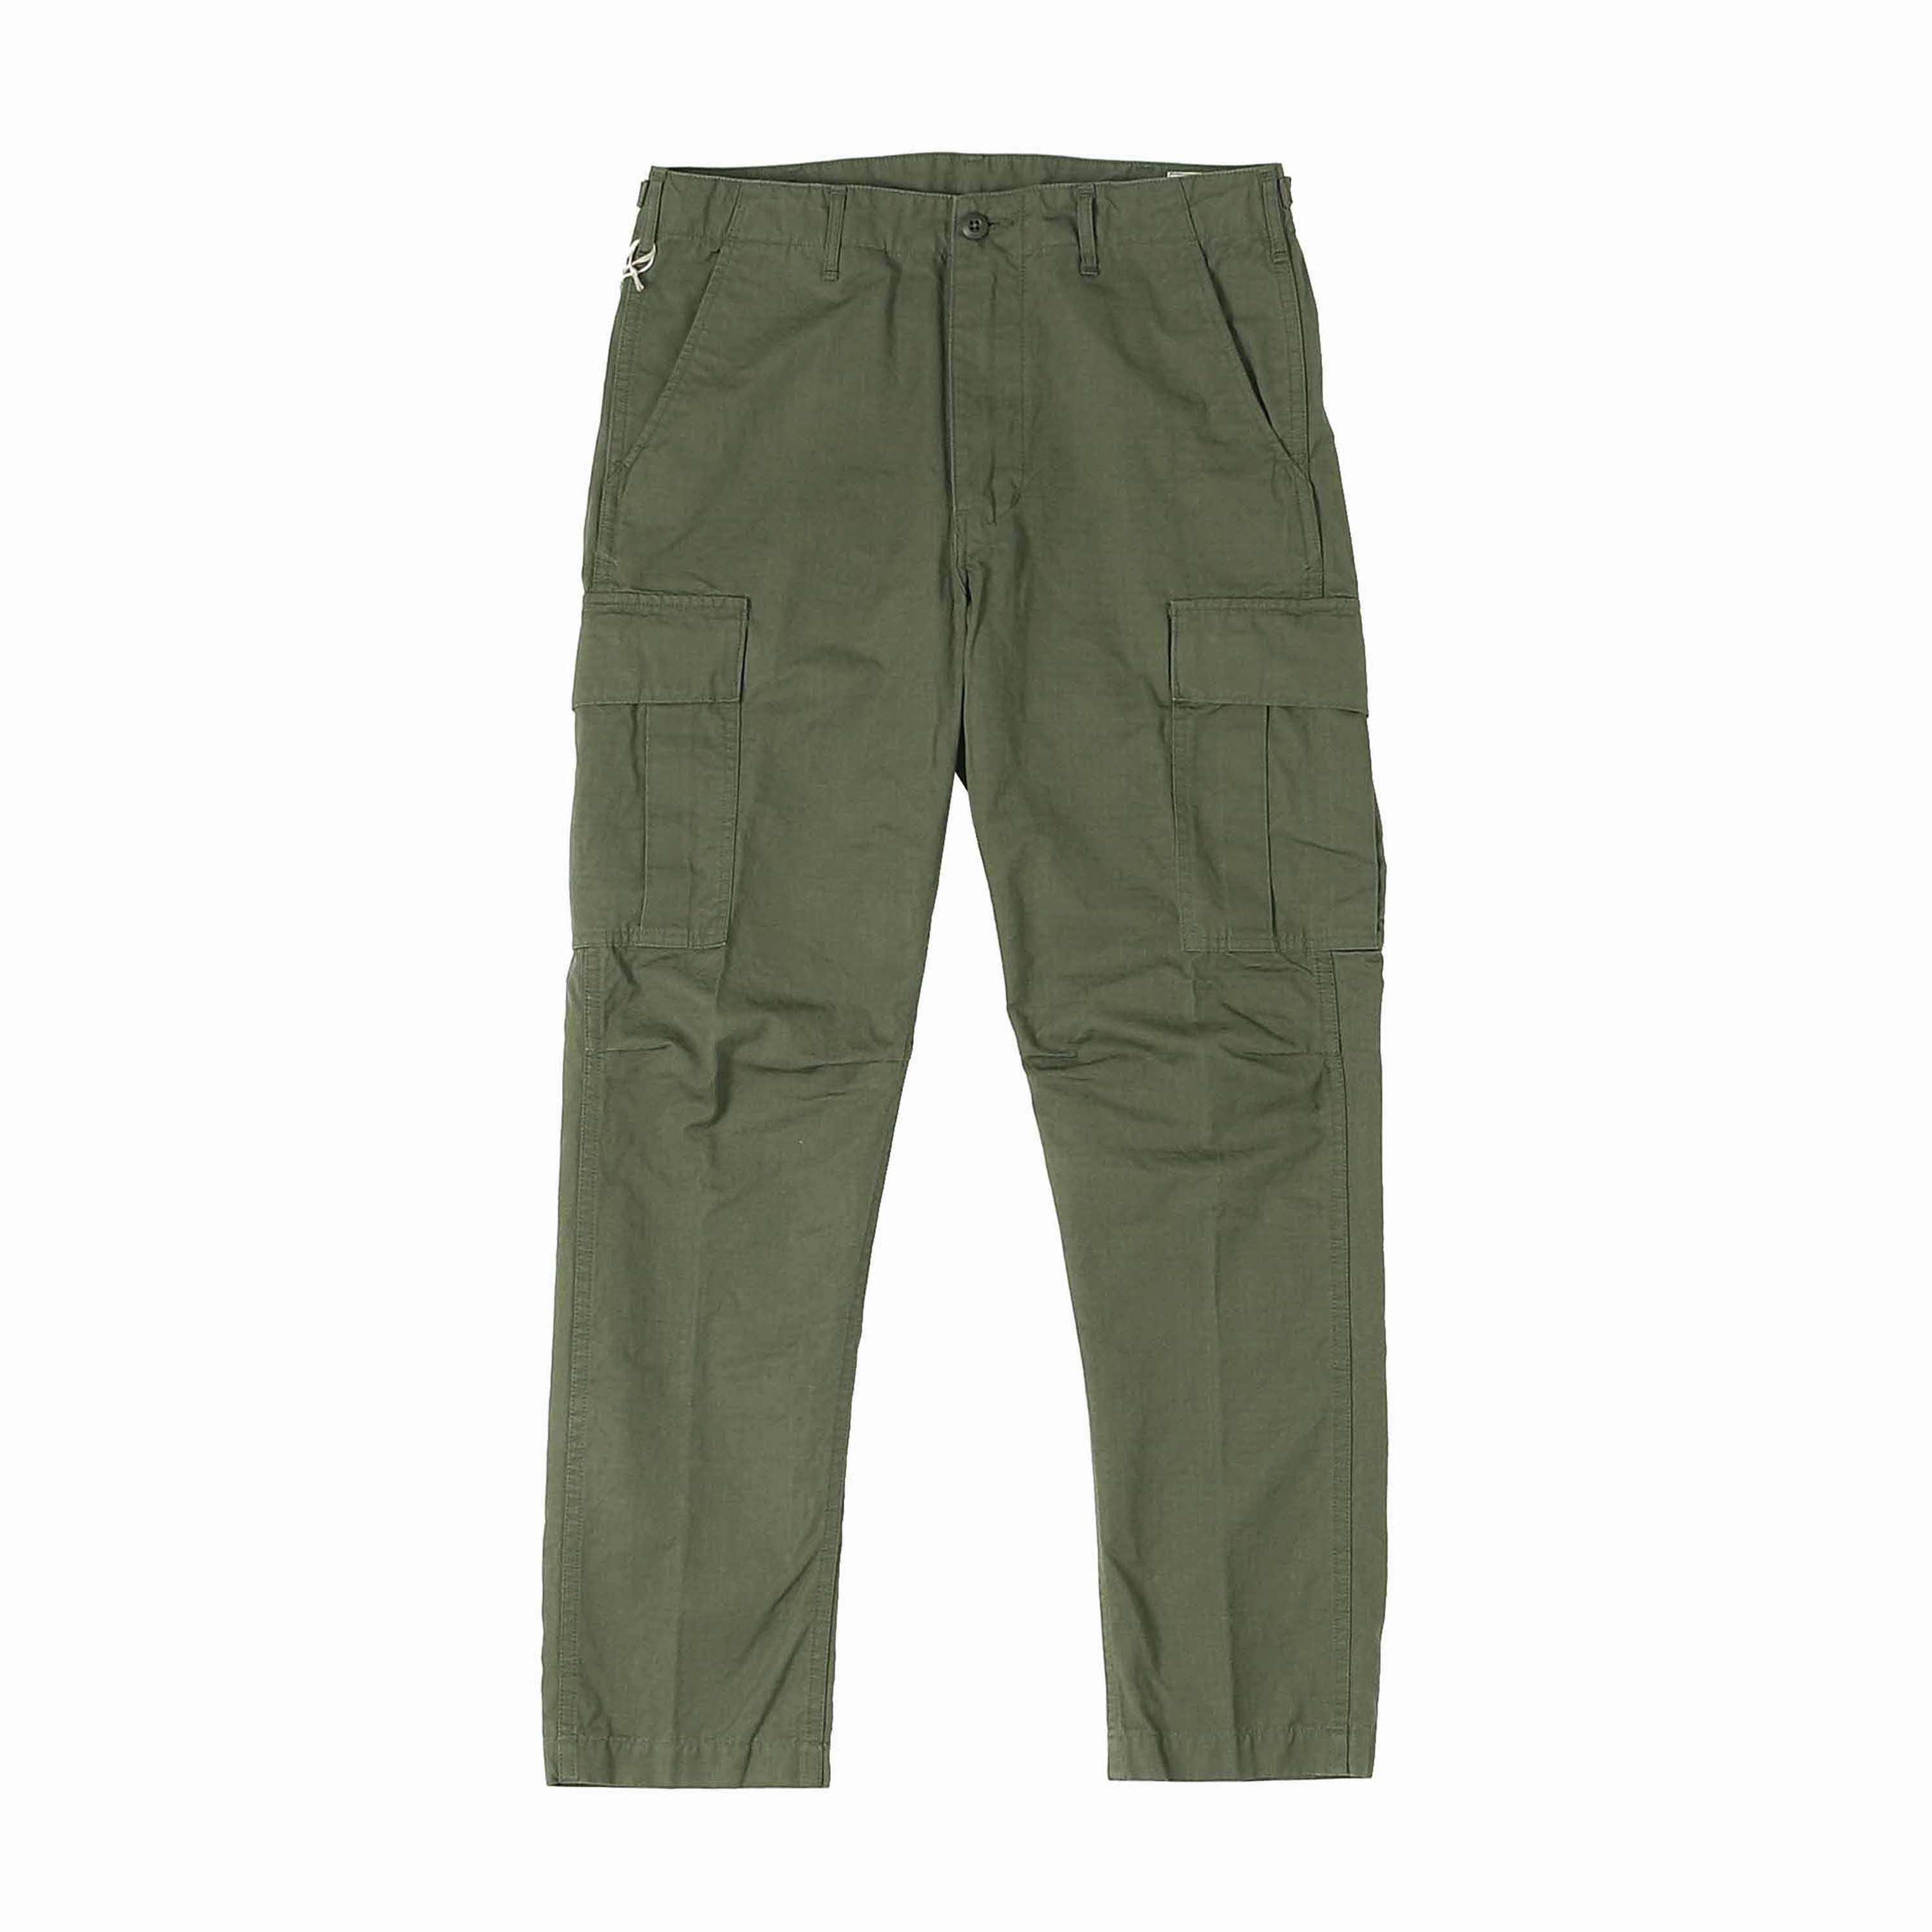 SLIM FIT 6P RIPSTOP CARGO PANTS - ARMY GREEN